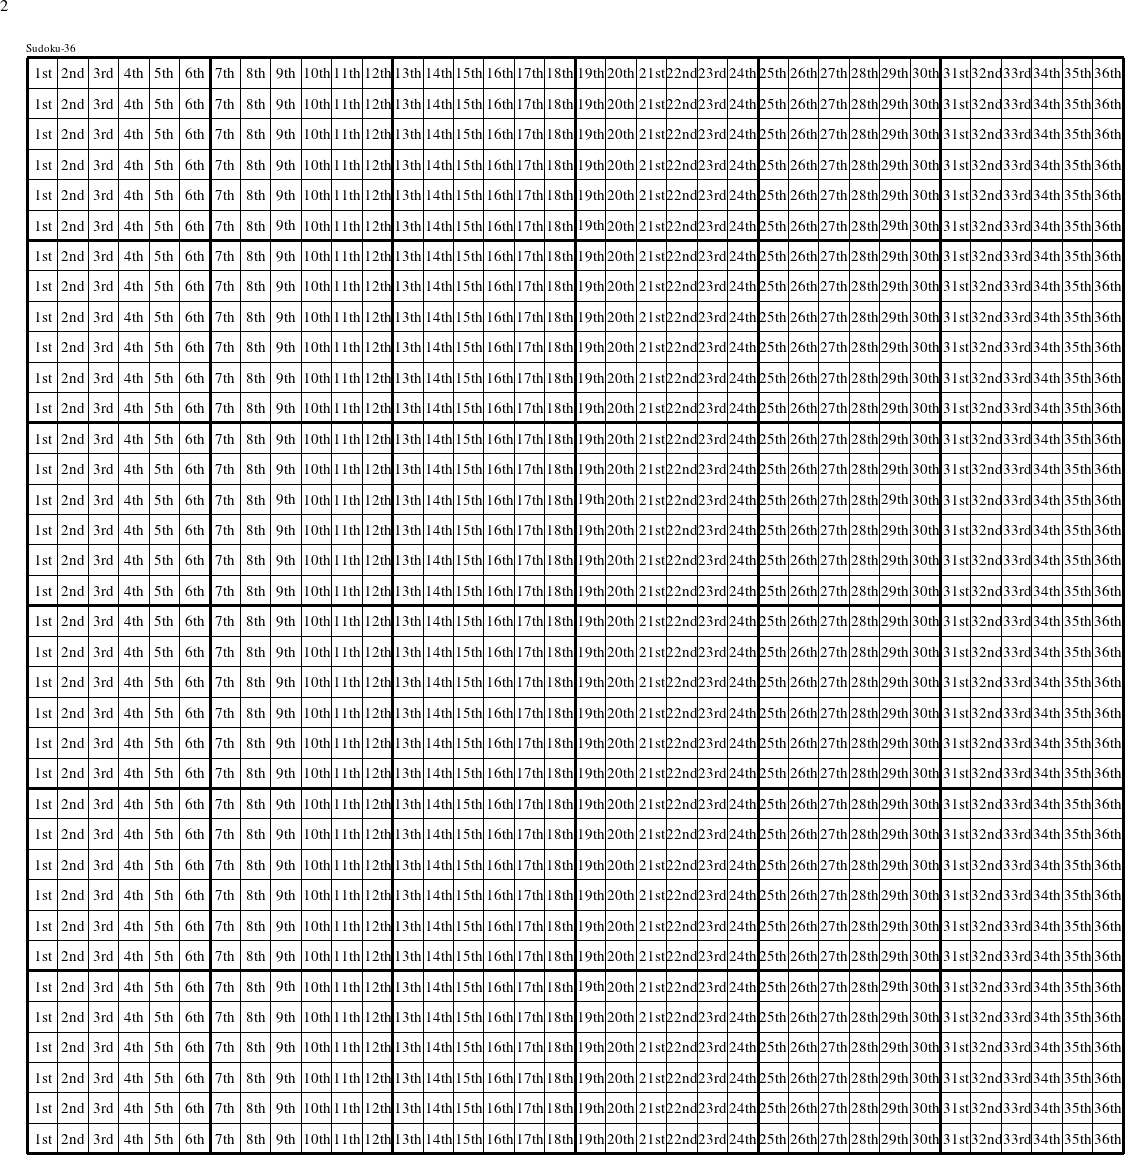 Each column is a group numbered as shown in this Sudoku-36 figure.